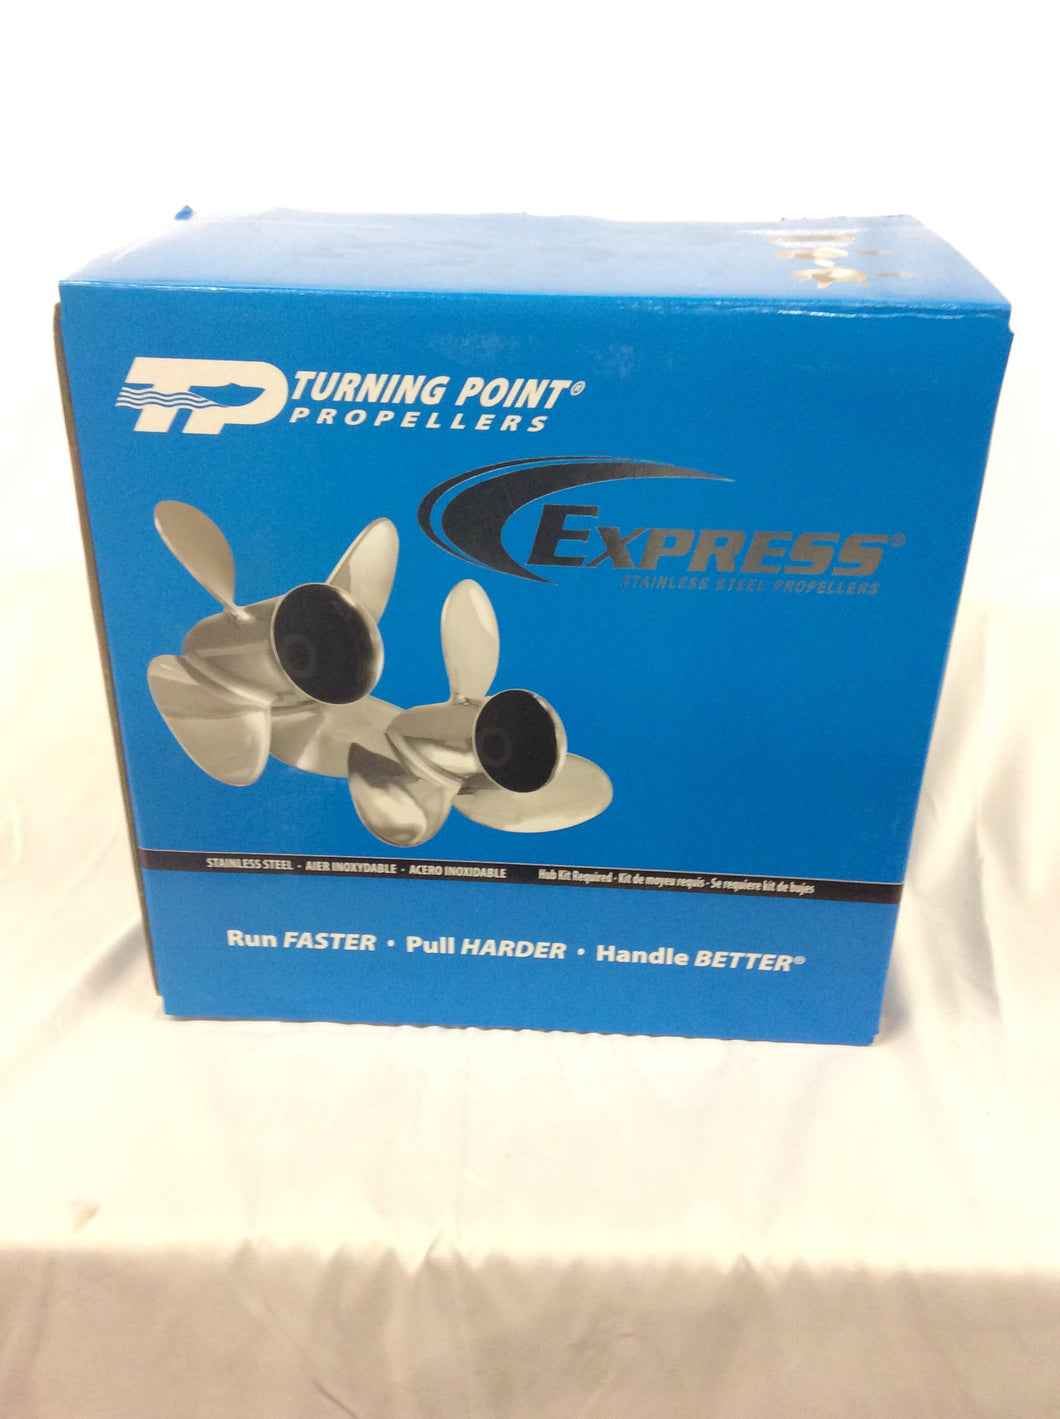 Turning Poinit Propeller, Express 31501712